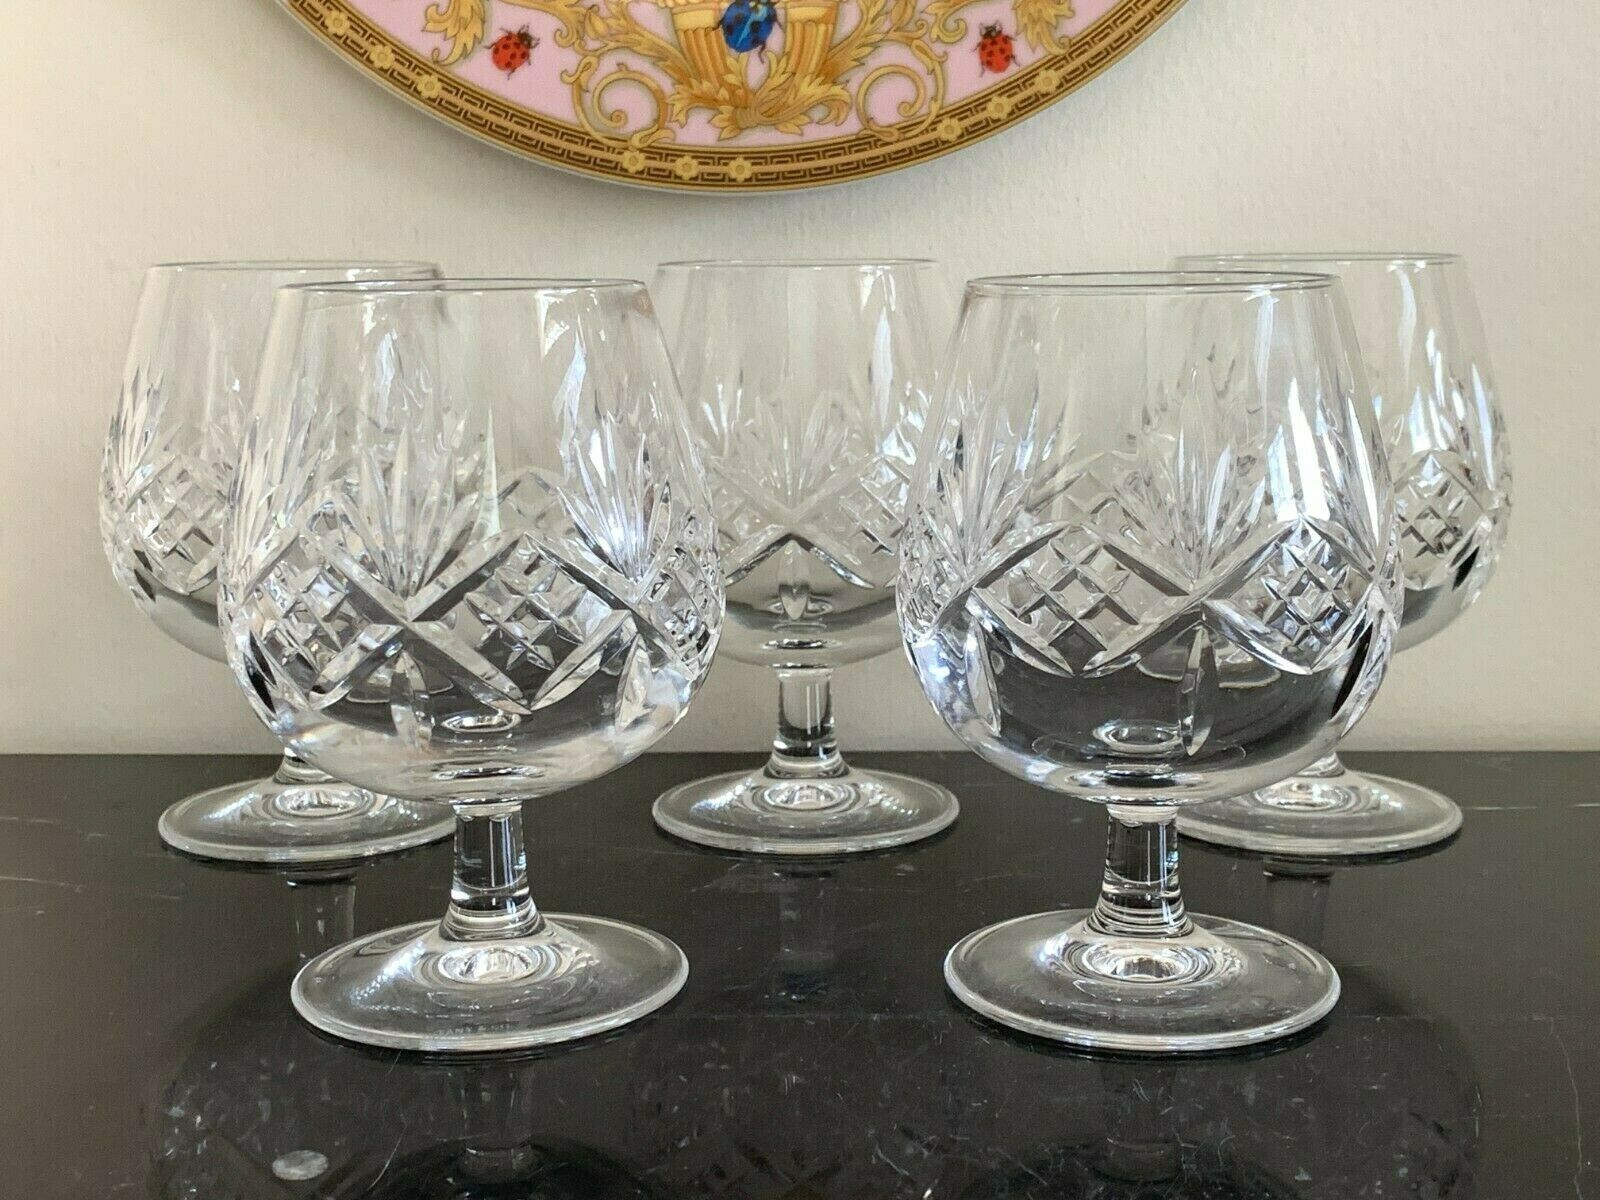 Tiffany & Co Newport Crystal Brandy Snifters Set of 5